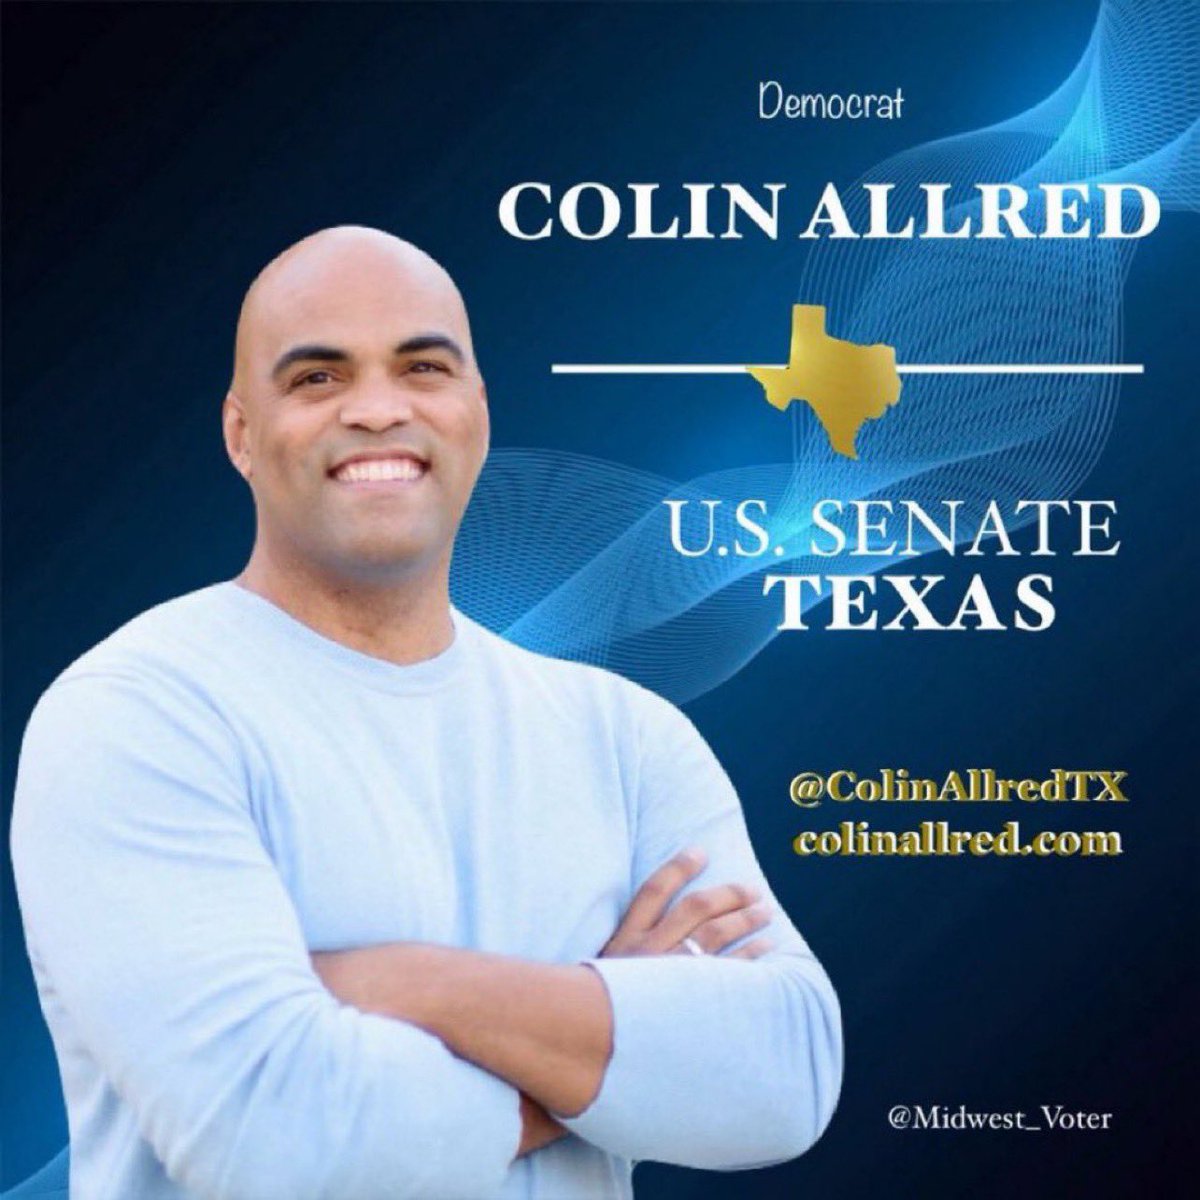 Won’t we be thrilled when a hardworking person like @ColinAllredTX replaces the “do nothing” Ted Cruz in the Senate his November? He will do what’s right for Texas by protecting SS, Medicare, the border, and women’s rights. #DemsUnited #DemVoice1 #wtpGOTV2024 #Allied4Dems